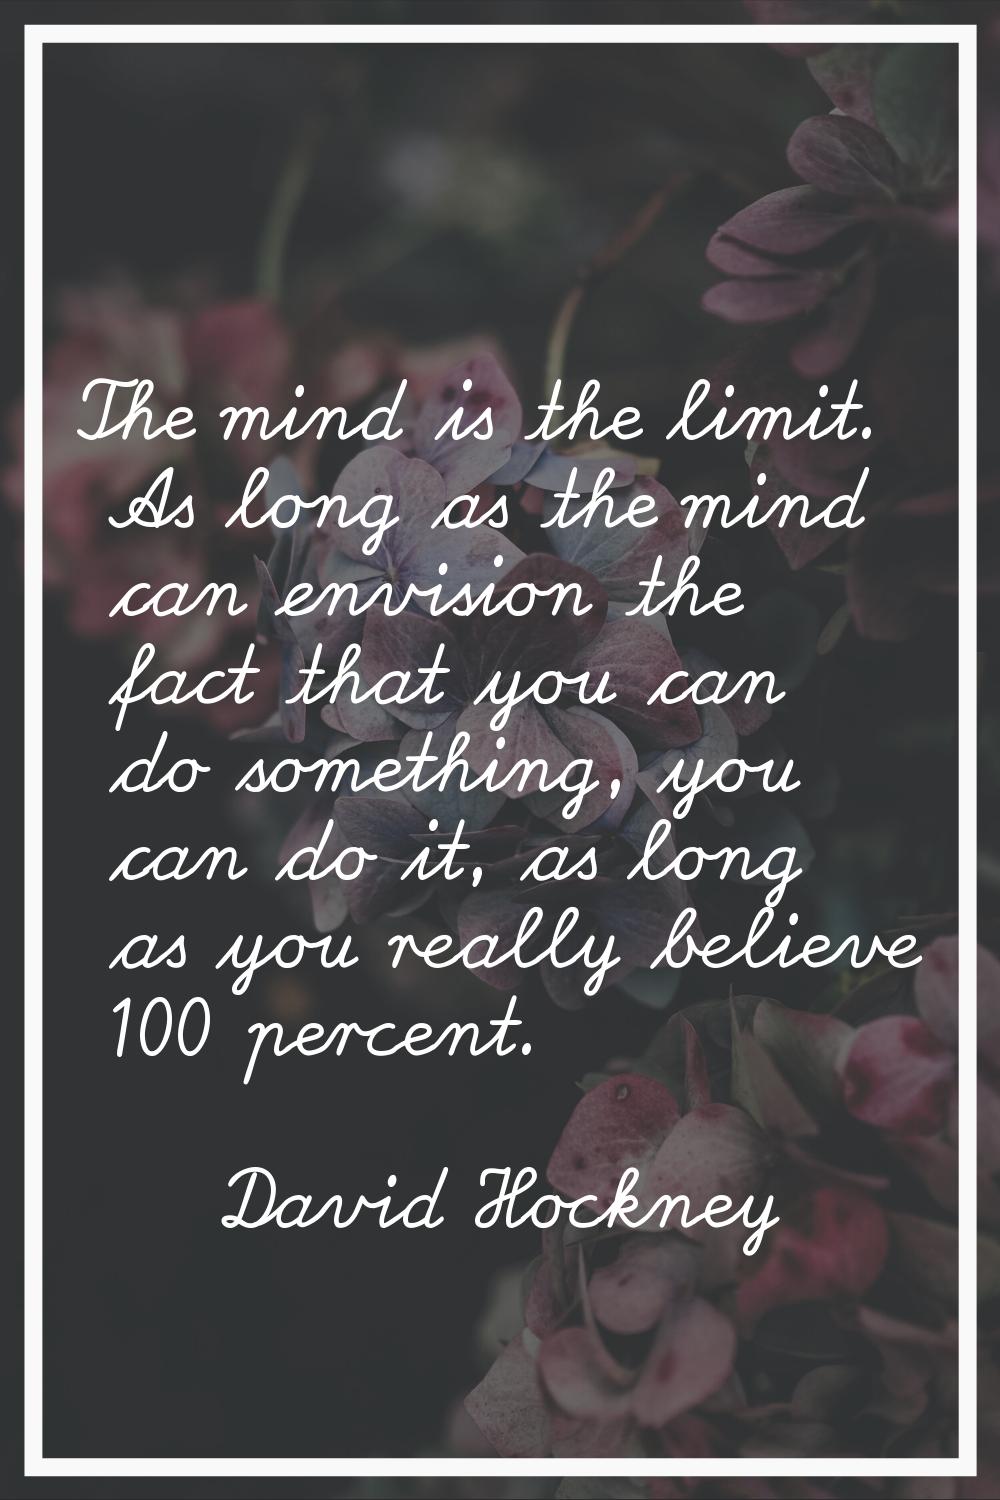 The mind is the limit. As long as the mind can envision the fact that you can do something, you can